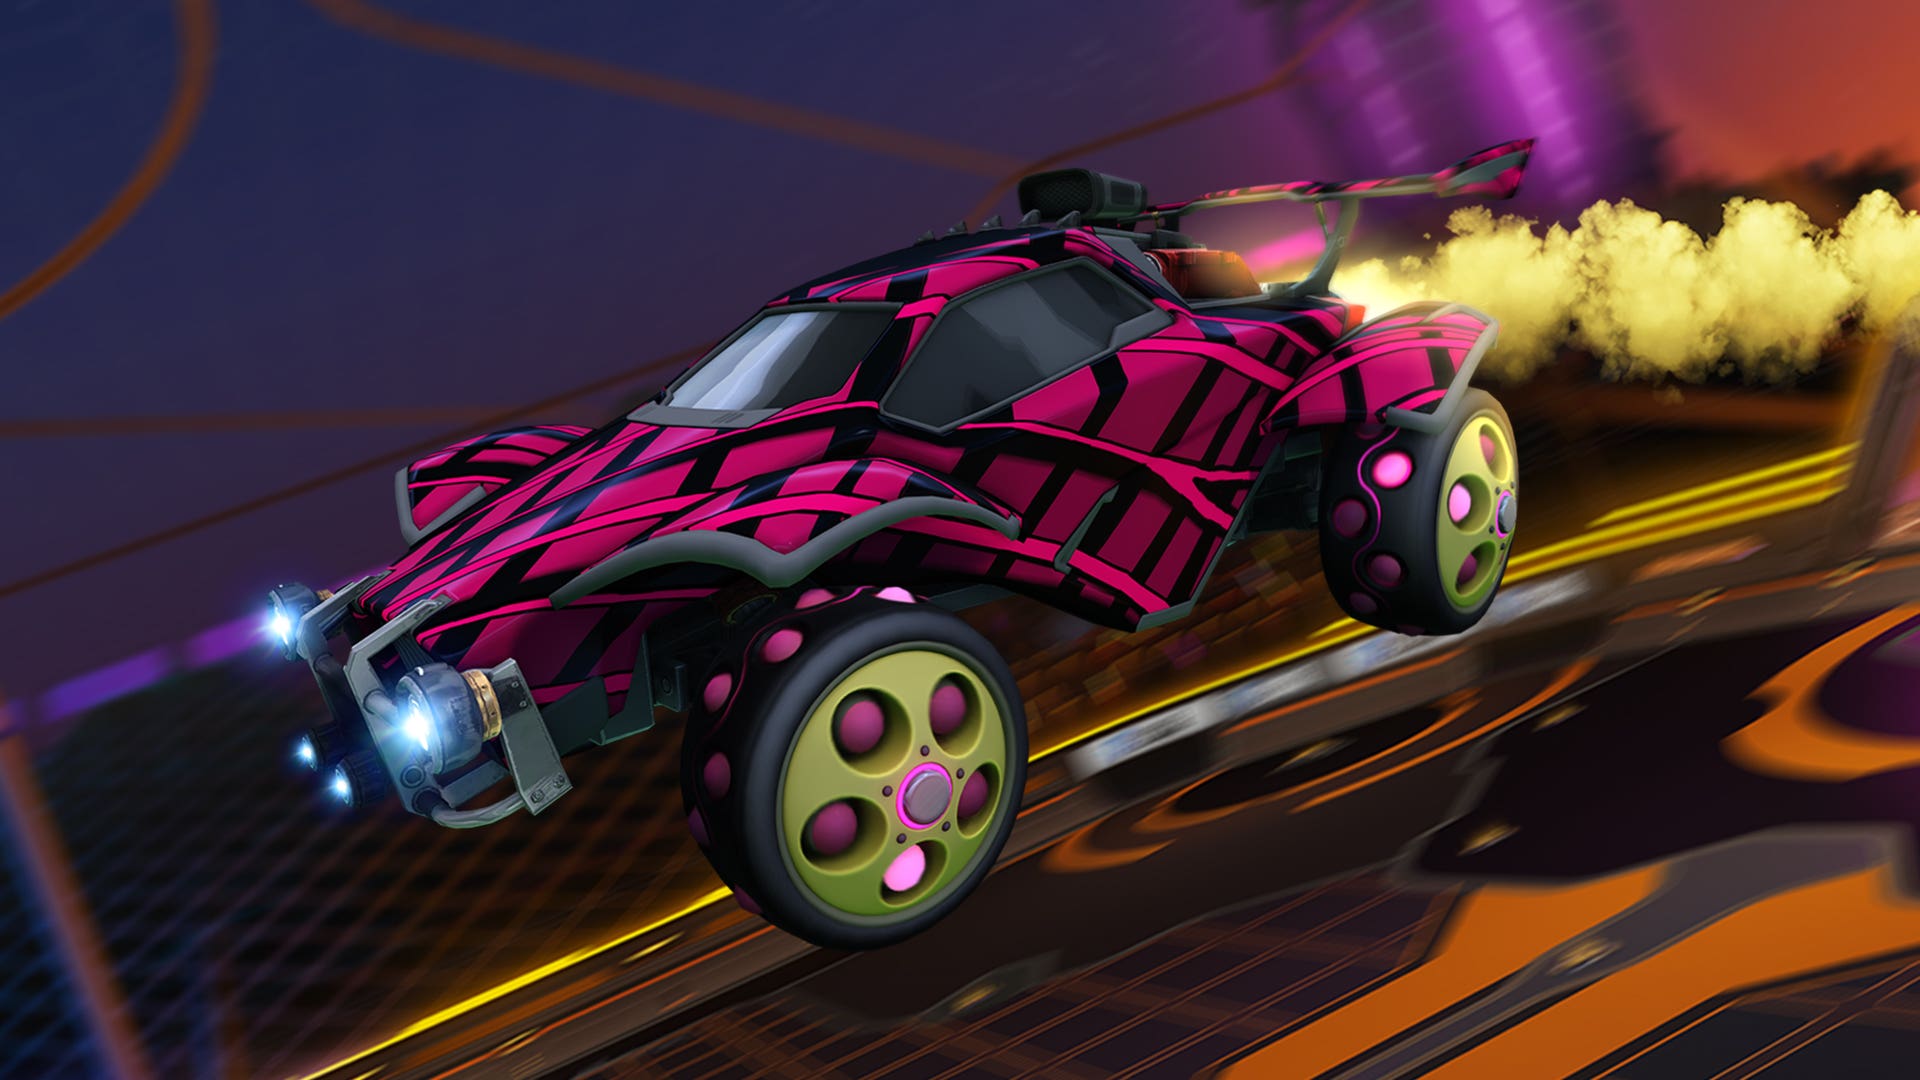 Rocket League Tournaments Update Details, Inside Look, and Release Date